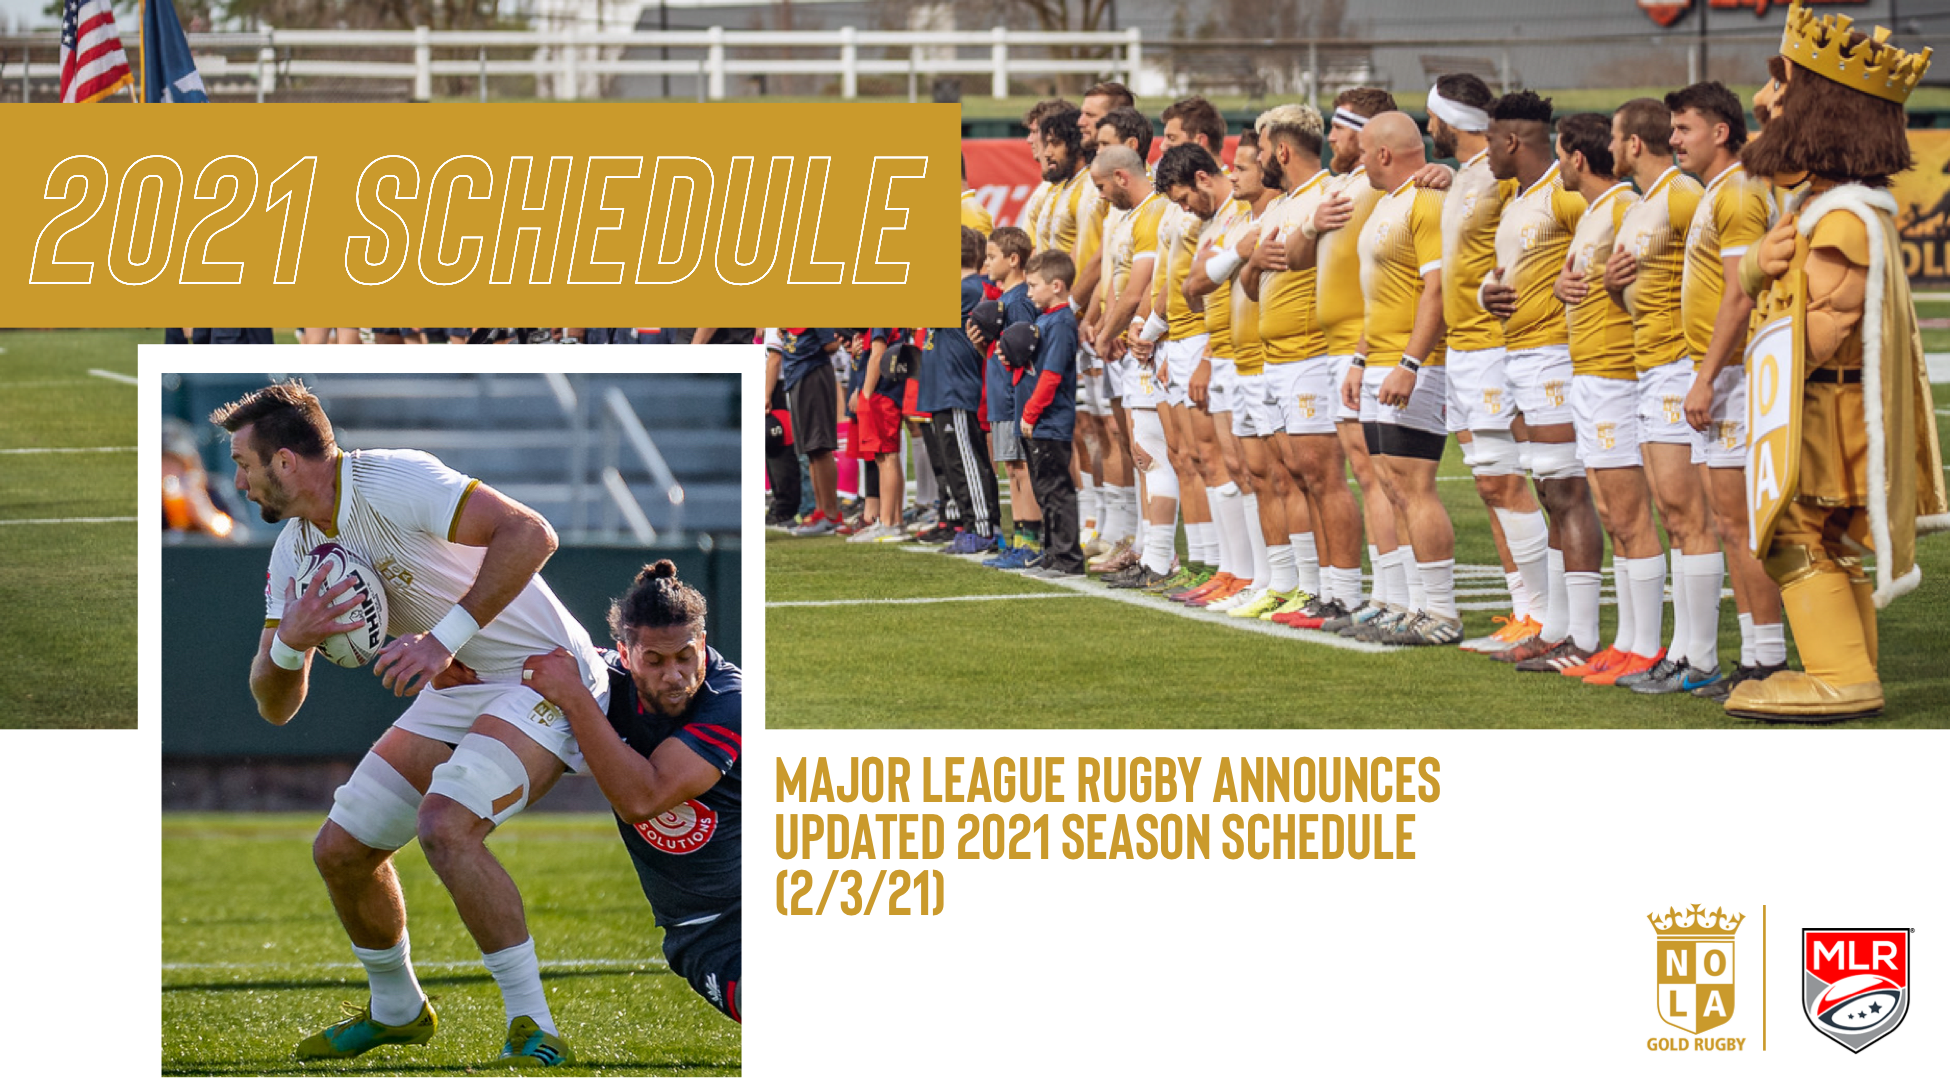 Major League Rugby Updated 2021 Season Schedule